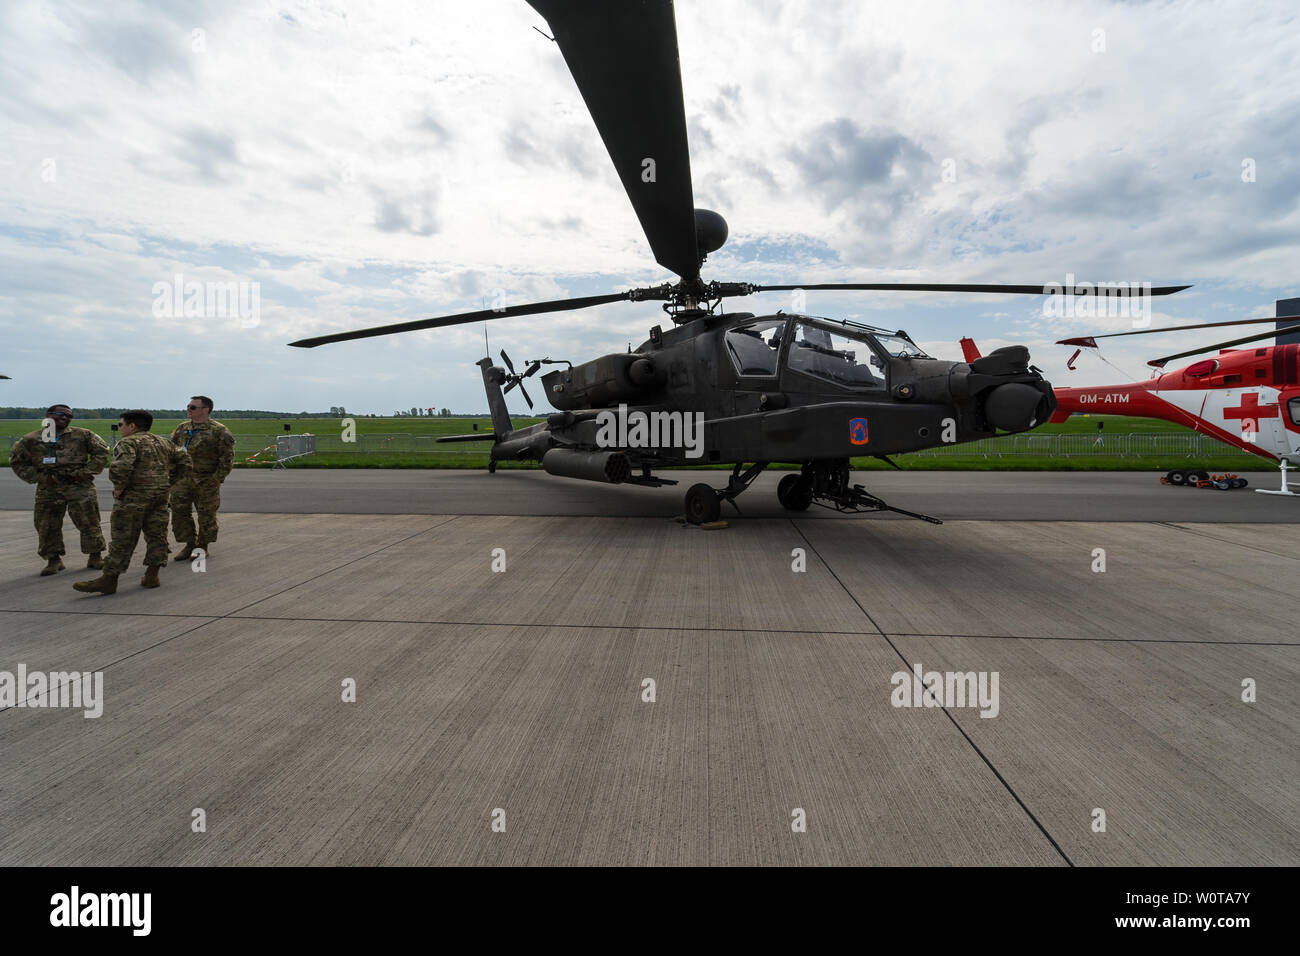 BERLIN, GERMANY - APRIL 25, 2018: Attack helicopter Boeing AH-64D Apache Longbow. US Army. Exhibition ILA Berlin Air Show 2018 Stock Photo